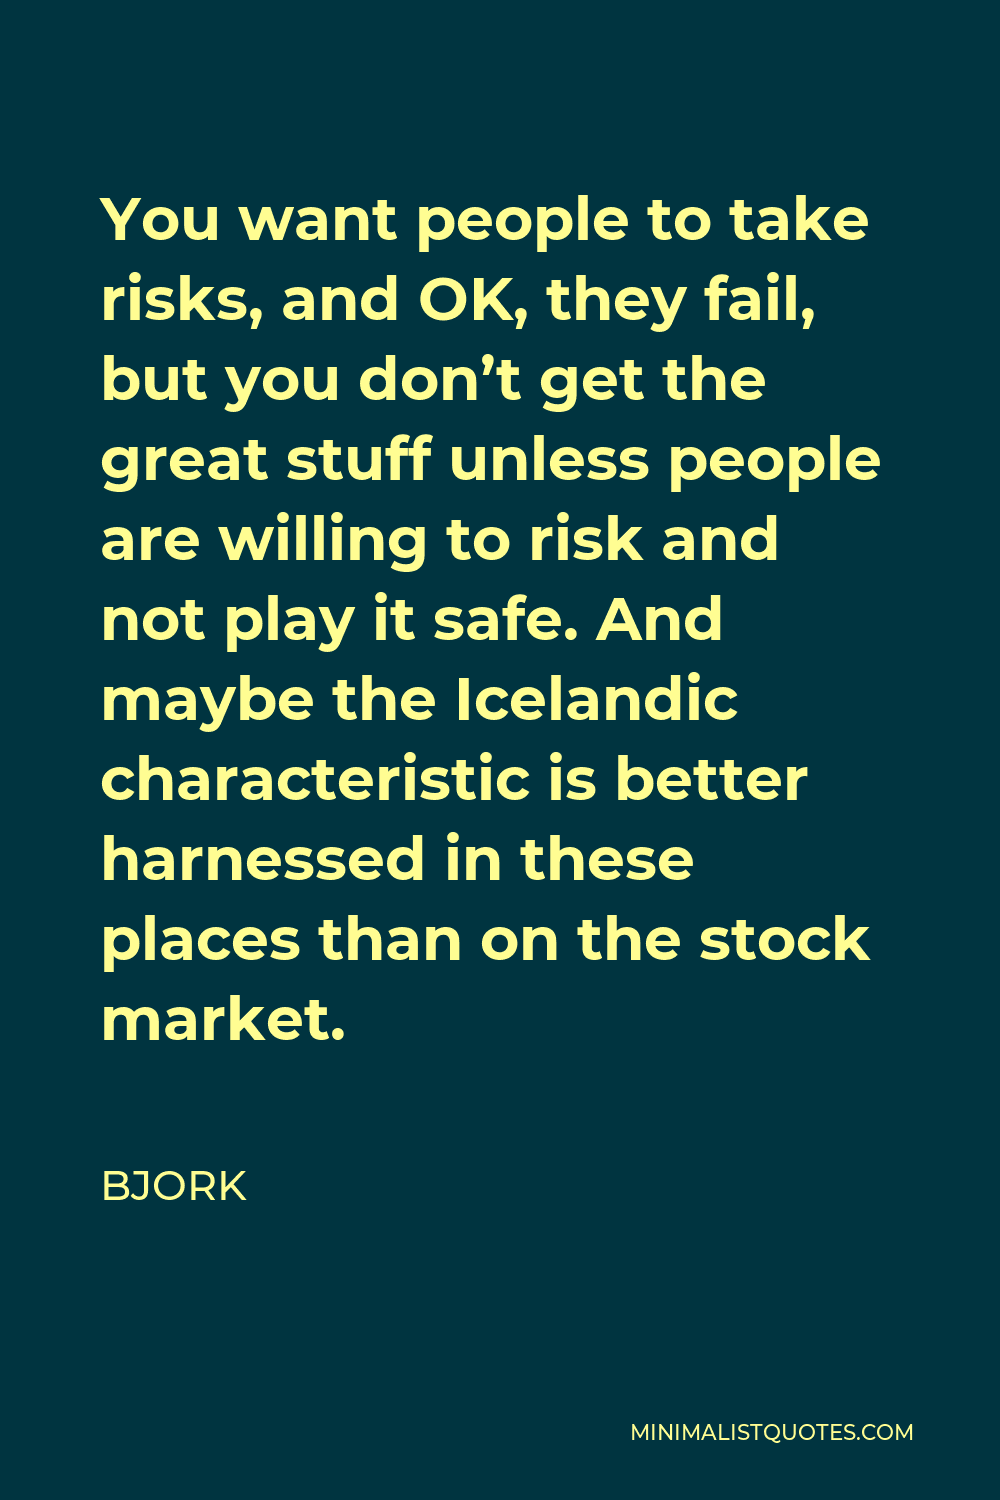 Bjork Quote - You want people to take risks, and OK, they fail, but you don’t get the great stuff unless people are willing to risk and not play it safe. And maybe the Icelandic characteristic is better harnessed in these places than on the stock market.